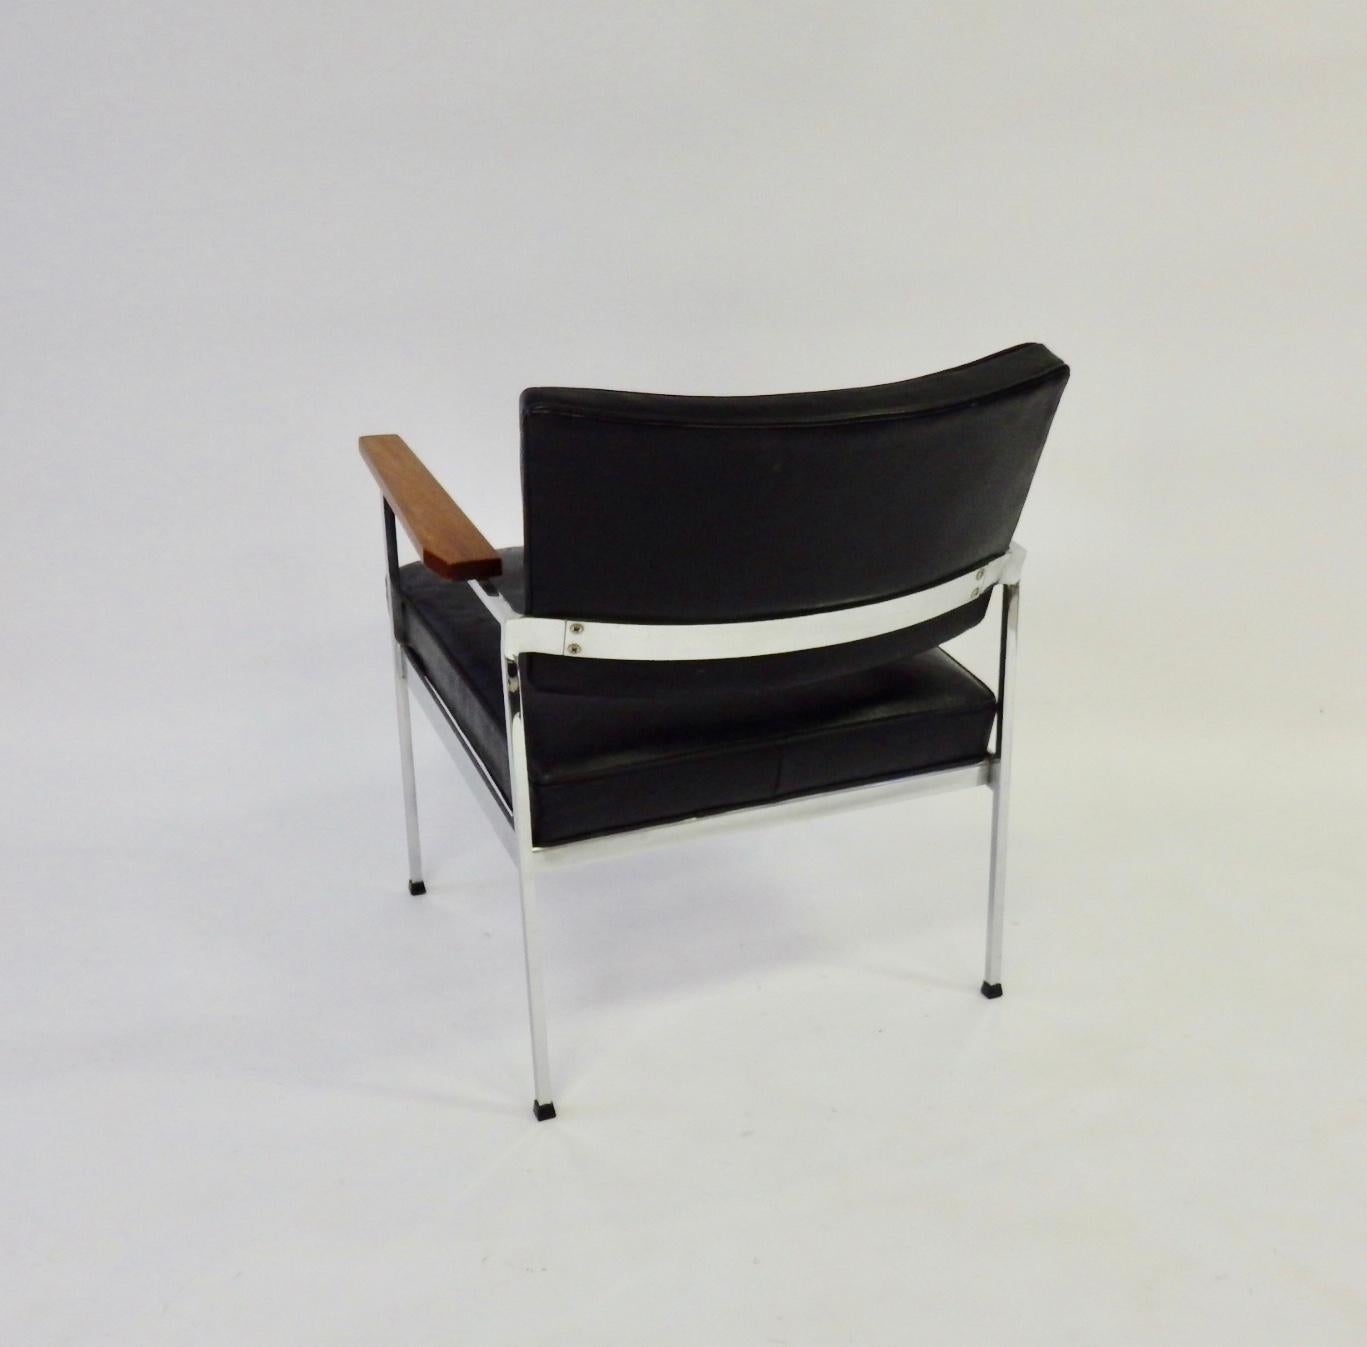 20th Century Vincent Cafiero for Knoll black leather on chrome frame chair